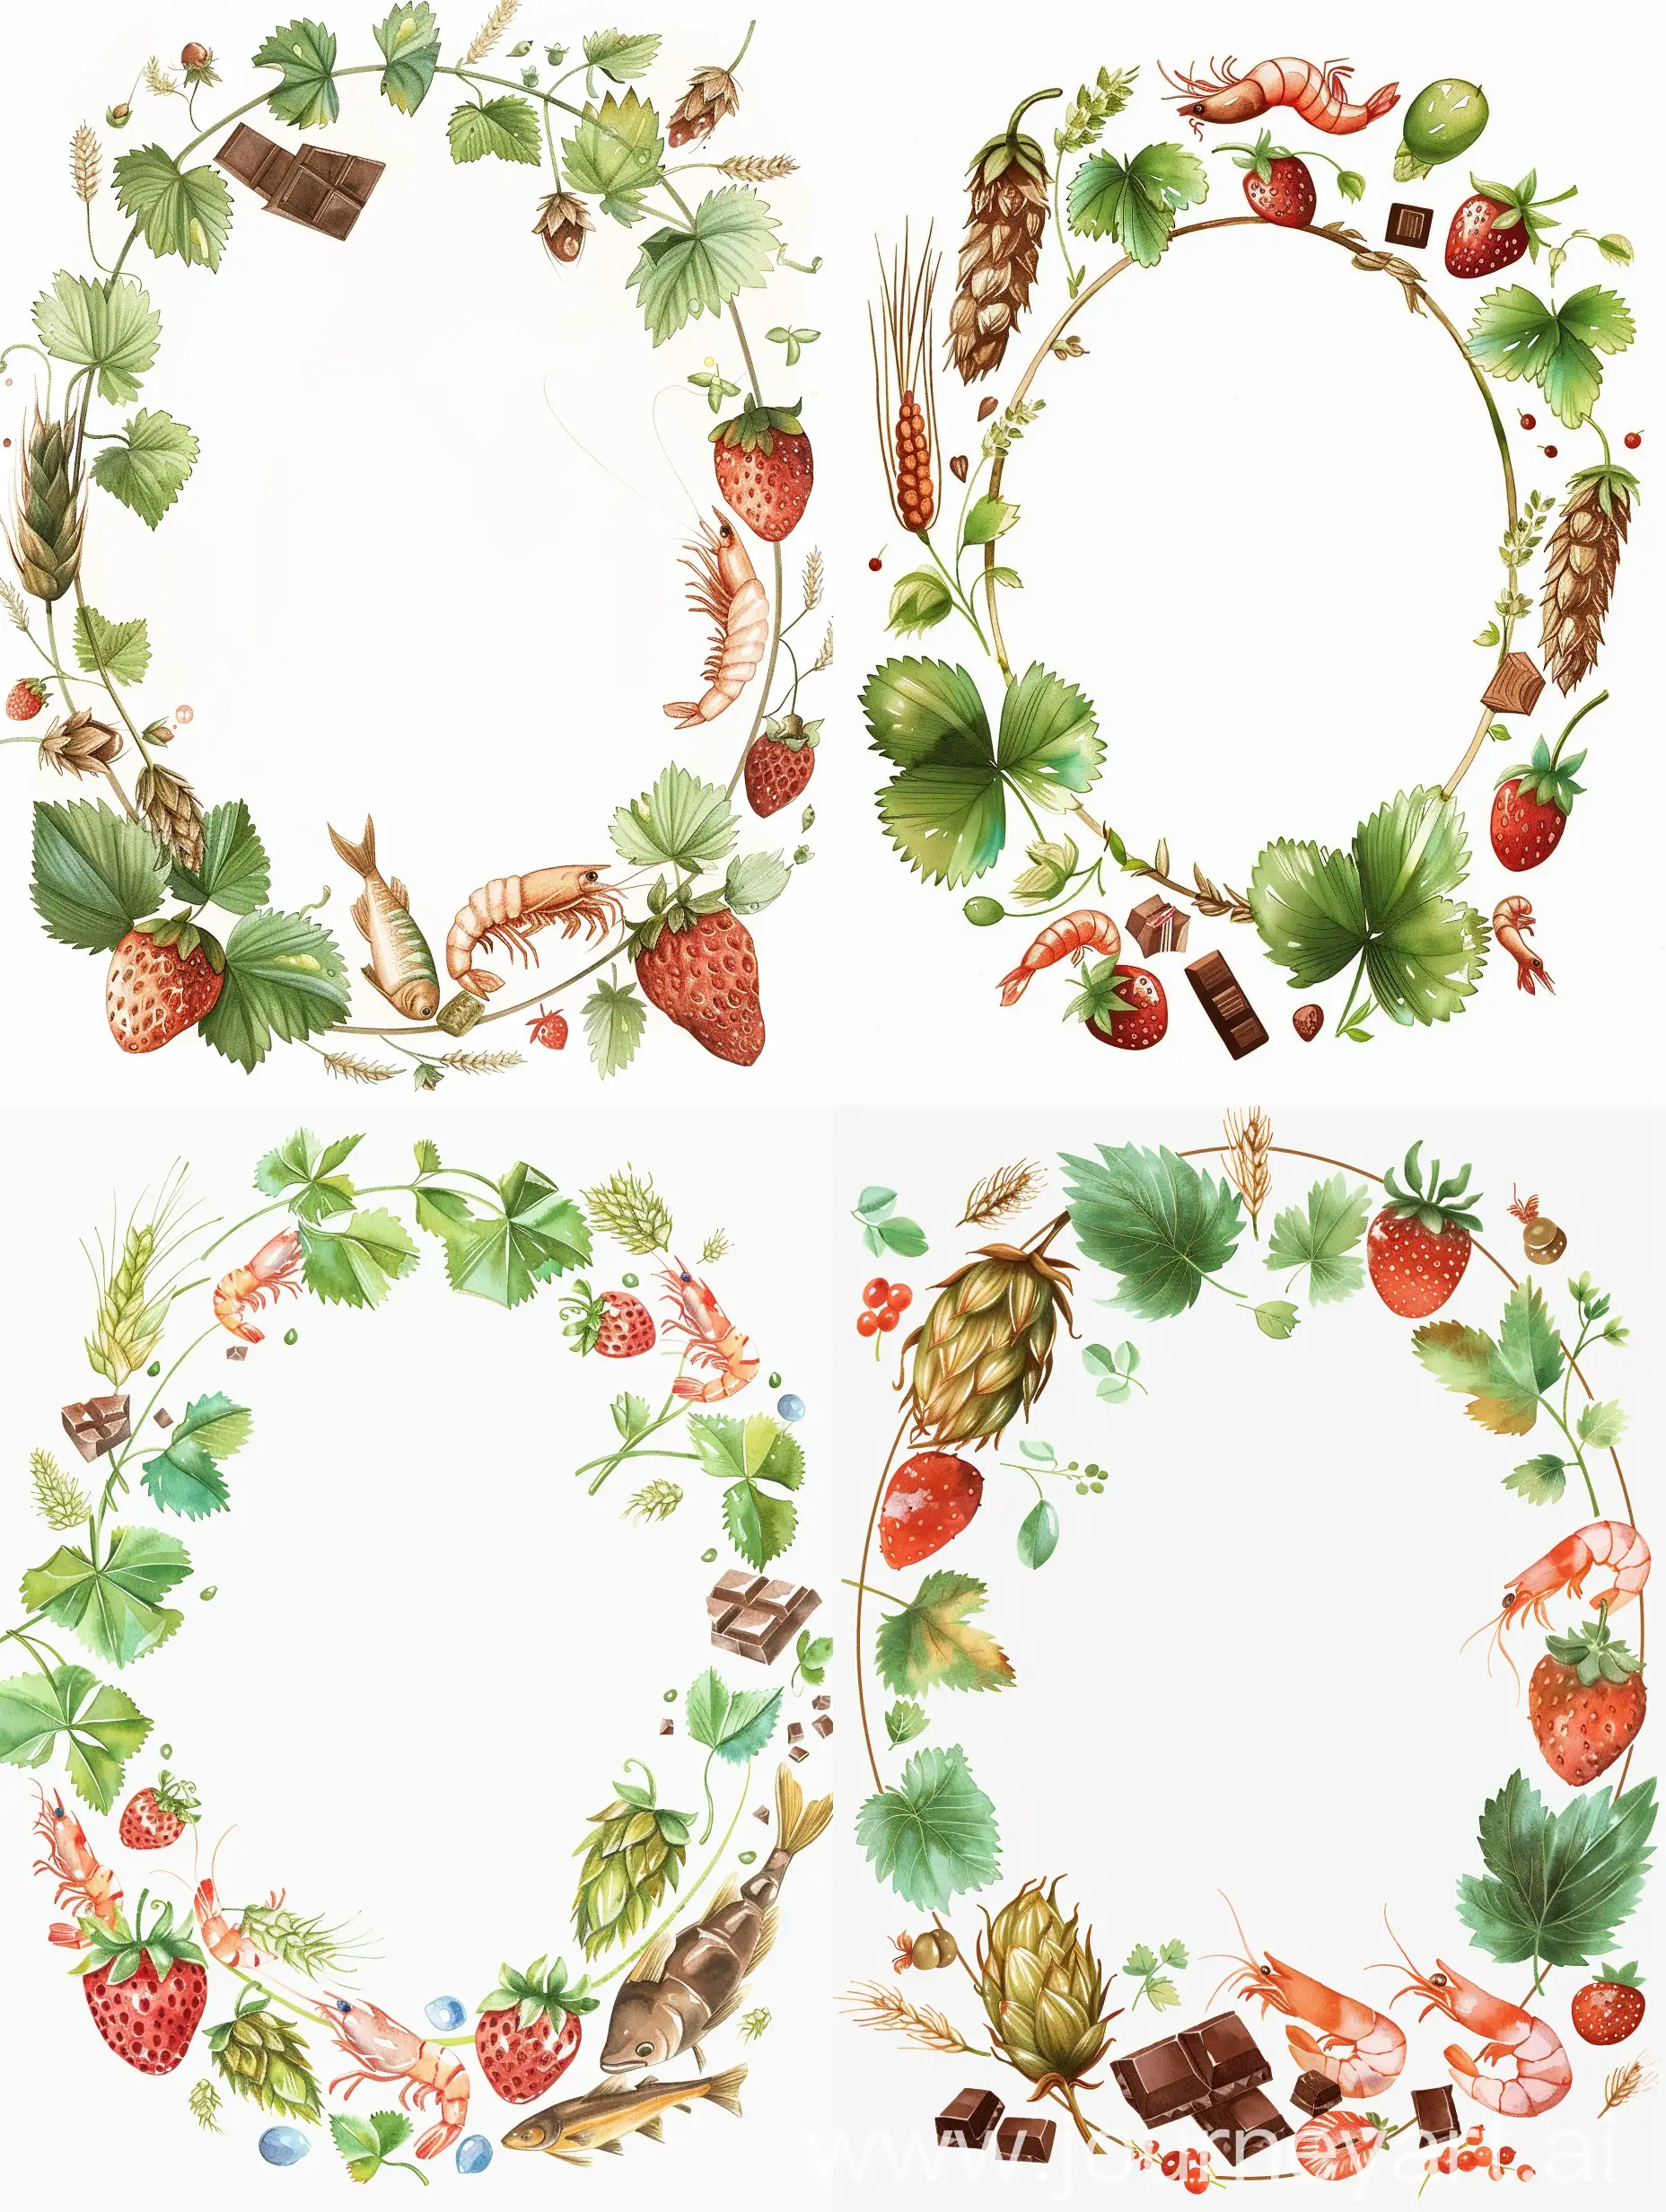 Delicate-Oval-Frame-Illustration-with-Hop-Leaves-Barley-Seafood-and-Chocolate-on-White-Background